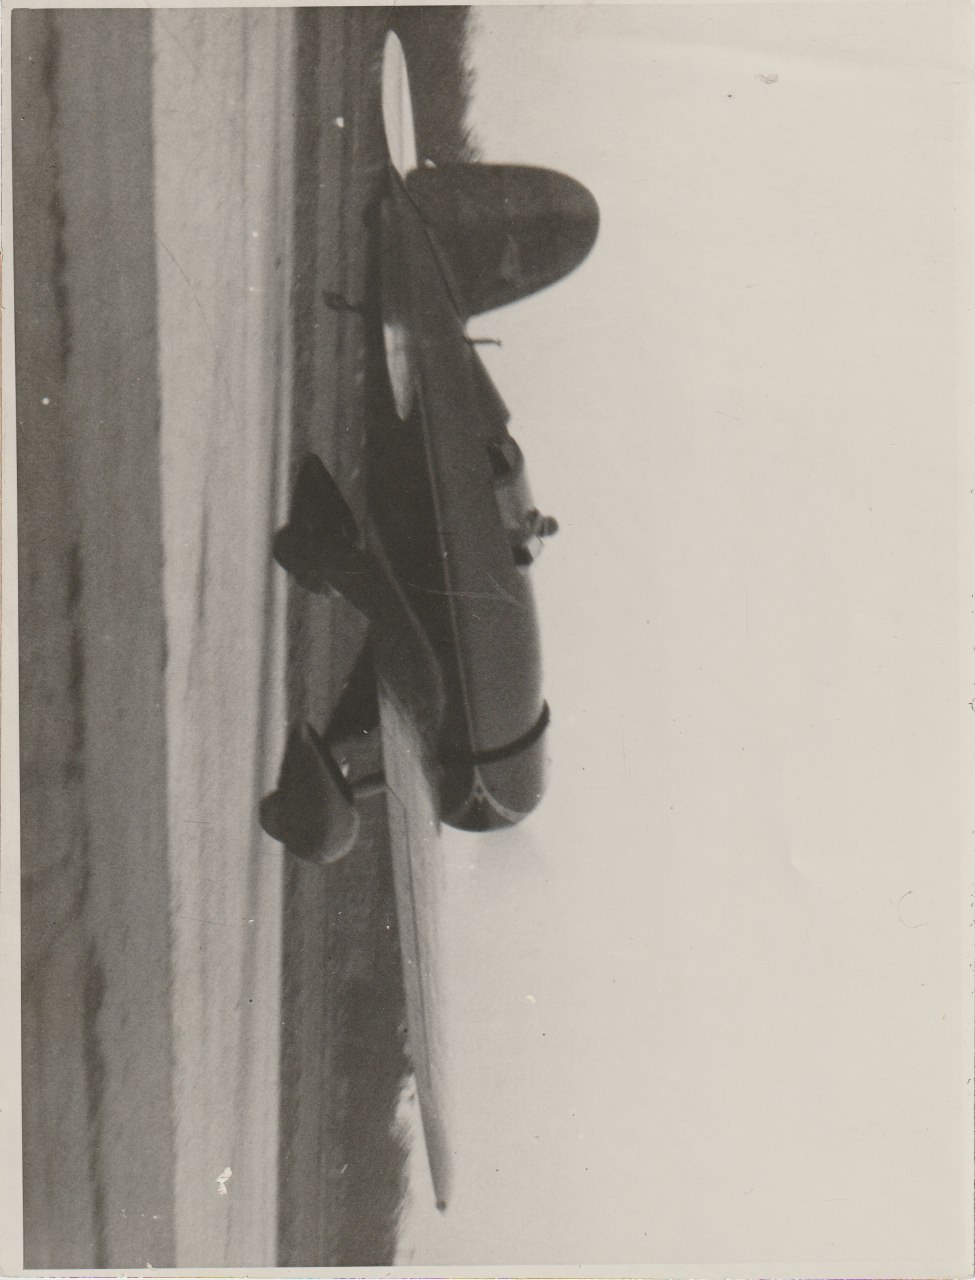 Press Photo Lindbergh in Experimental Plane with Caption.